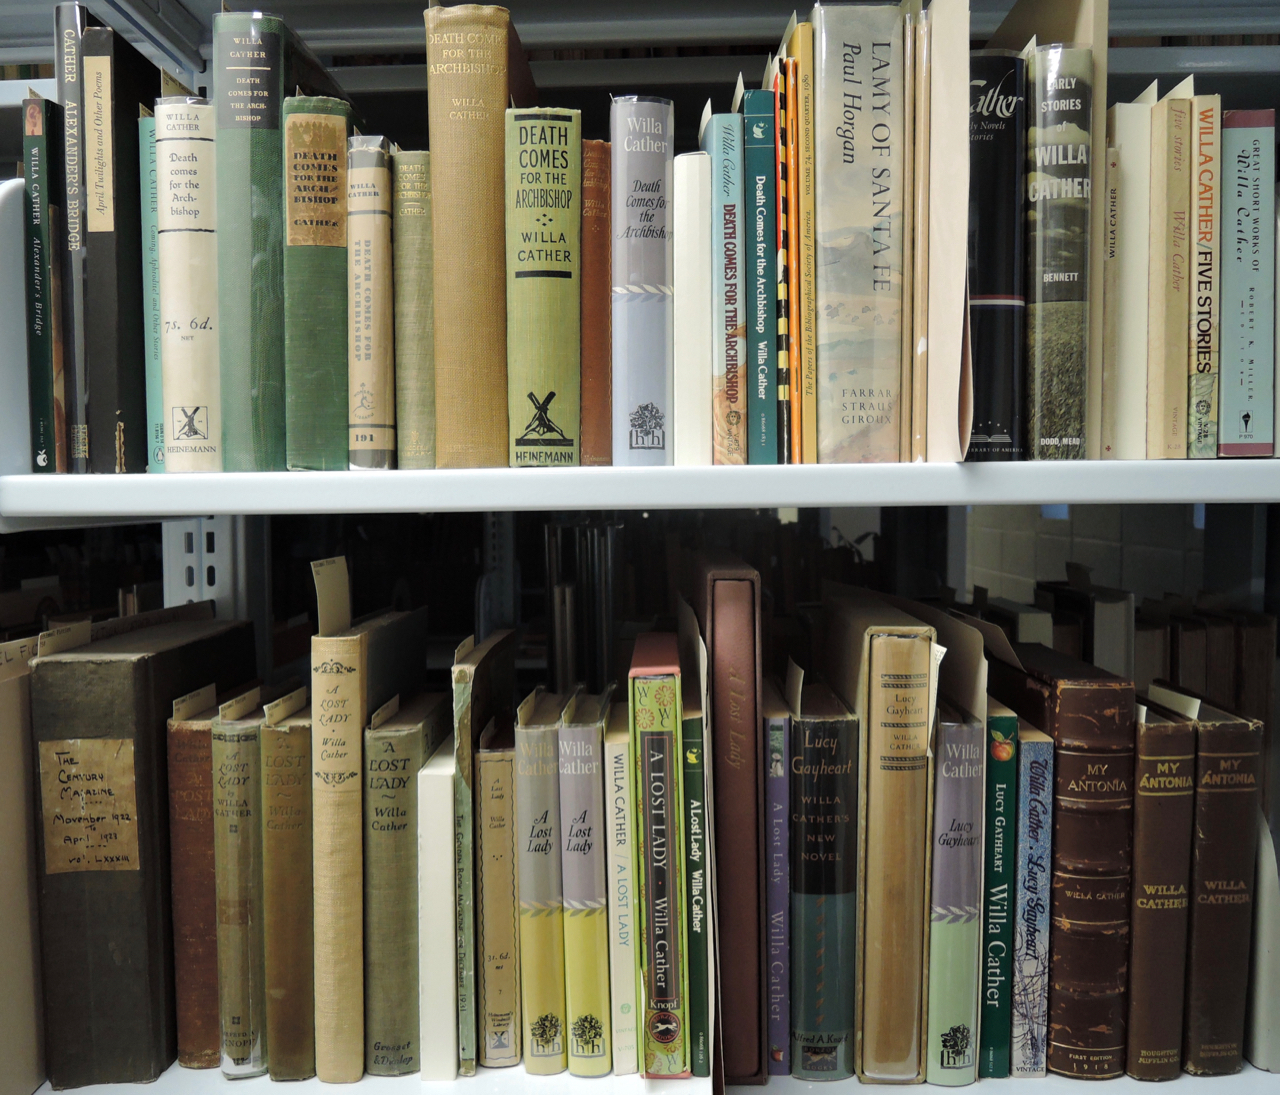 A selection of works by Willa Cather on shelves in the Schimmel Collection